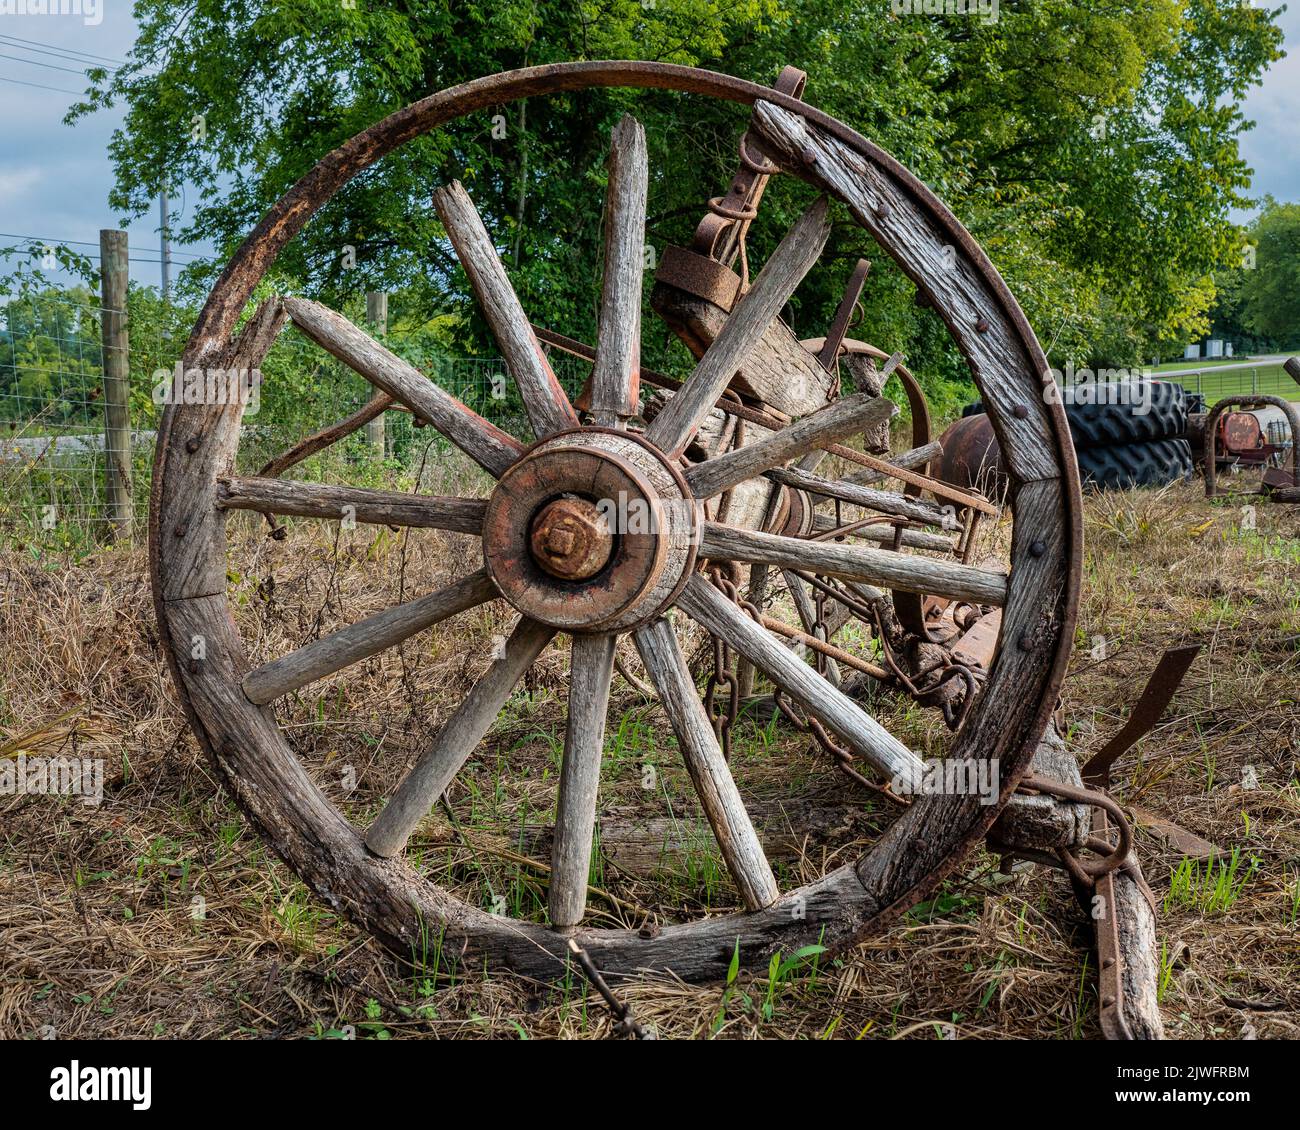 Weathered old cracked and rusted wooden spoked wagon wheel. Stock Photo